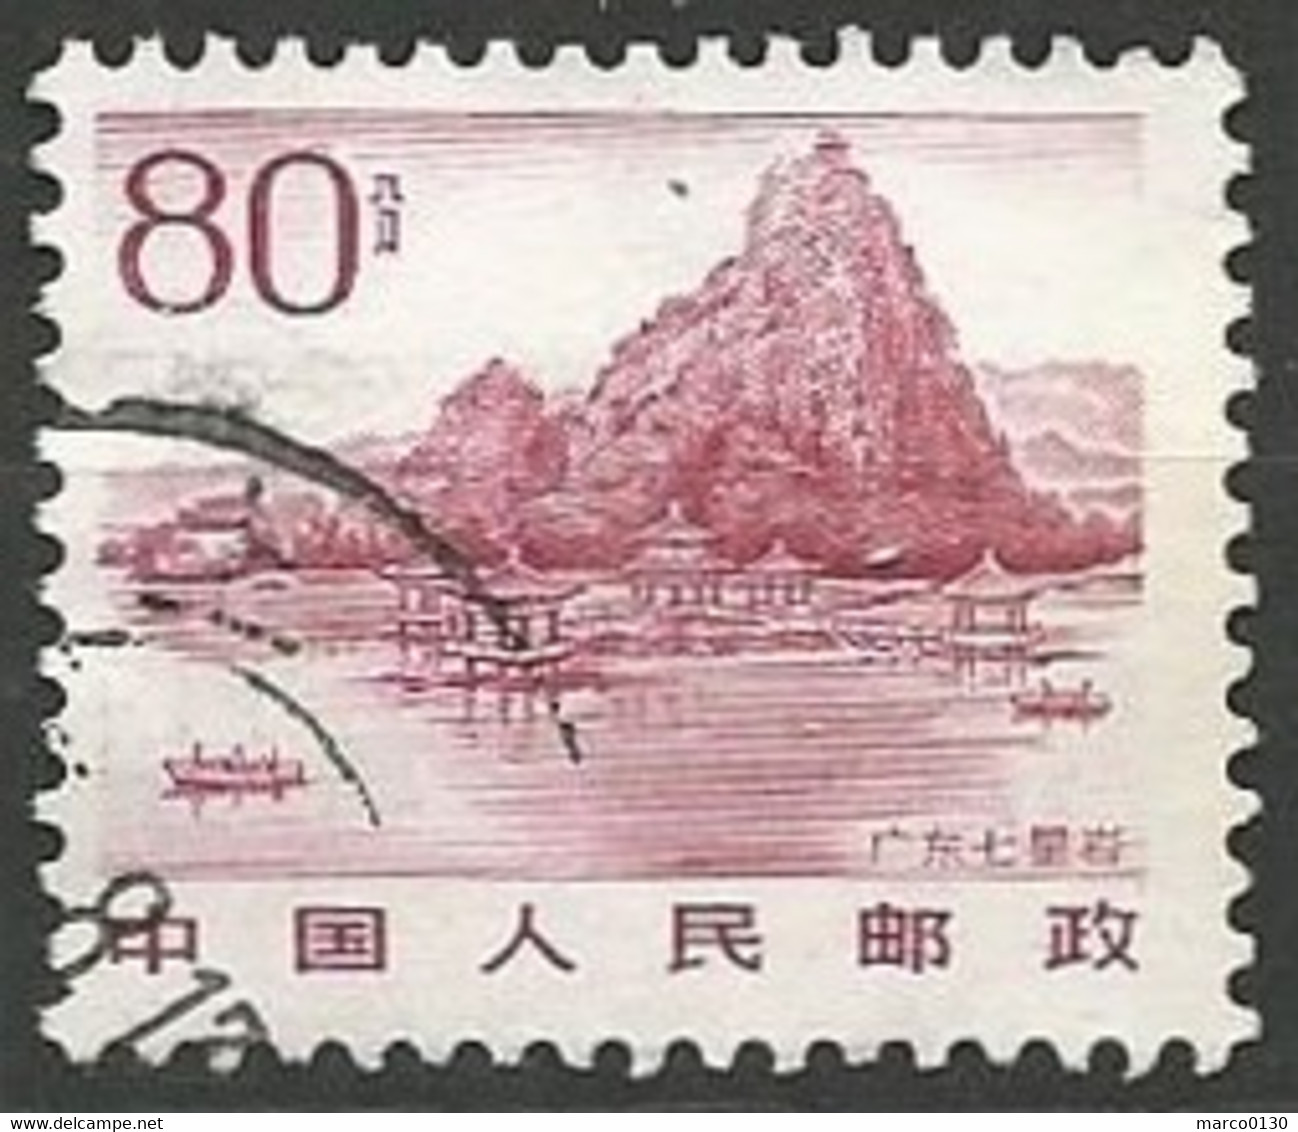 CHINE / REPUBLIQUE POPULAIRE N° 2589 OBLITERE - Used Stamps